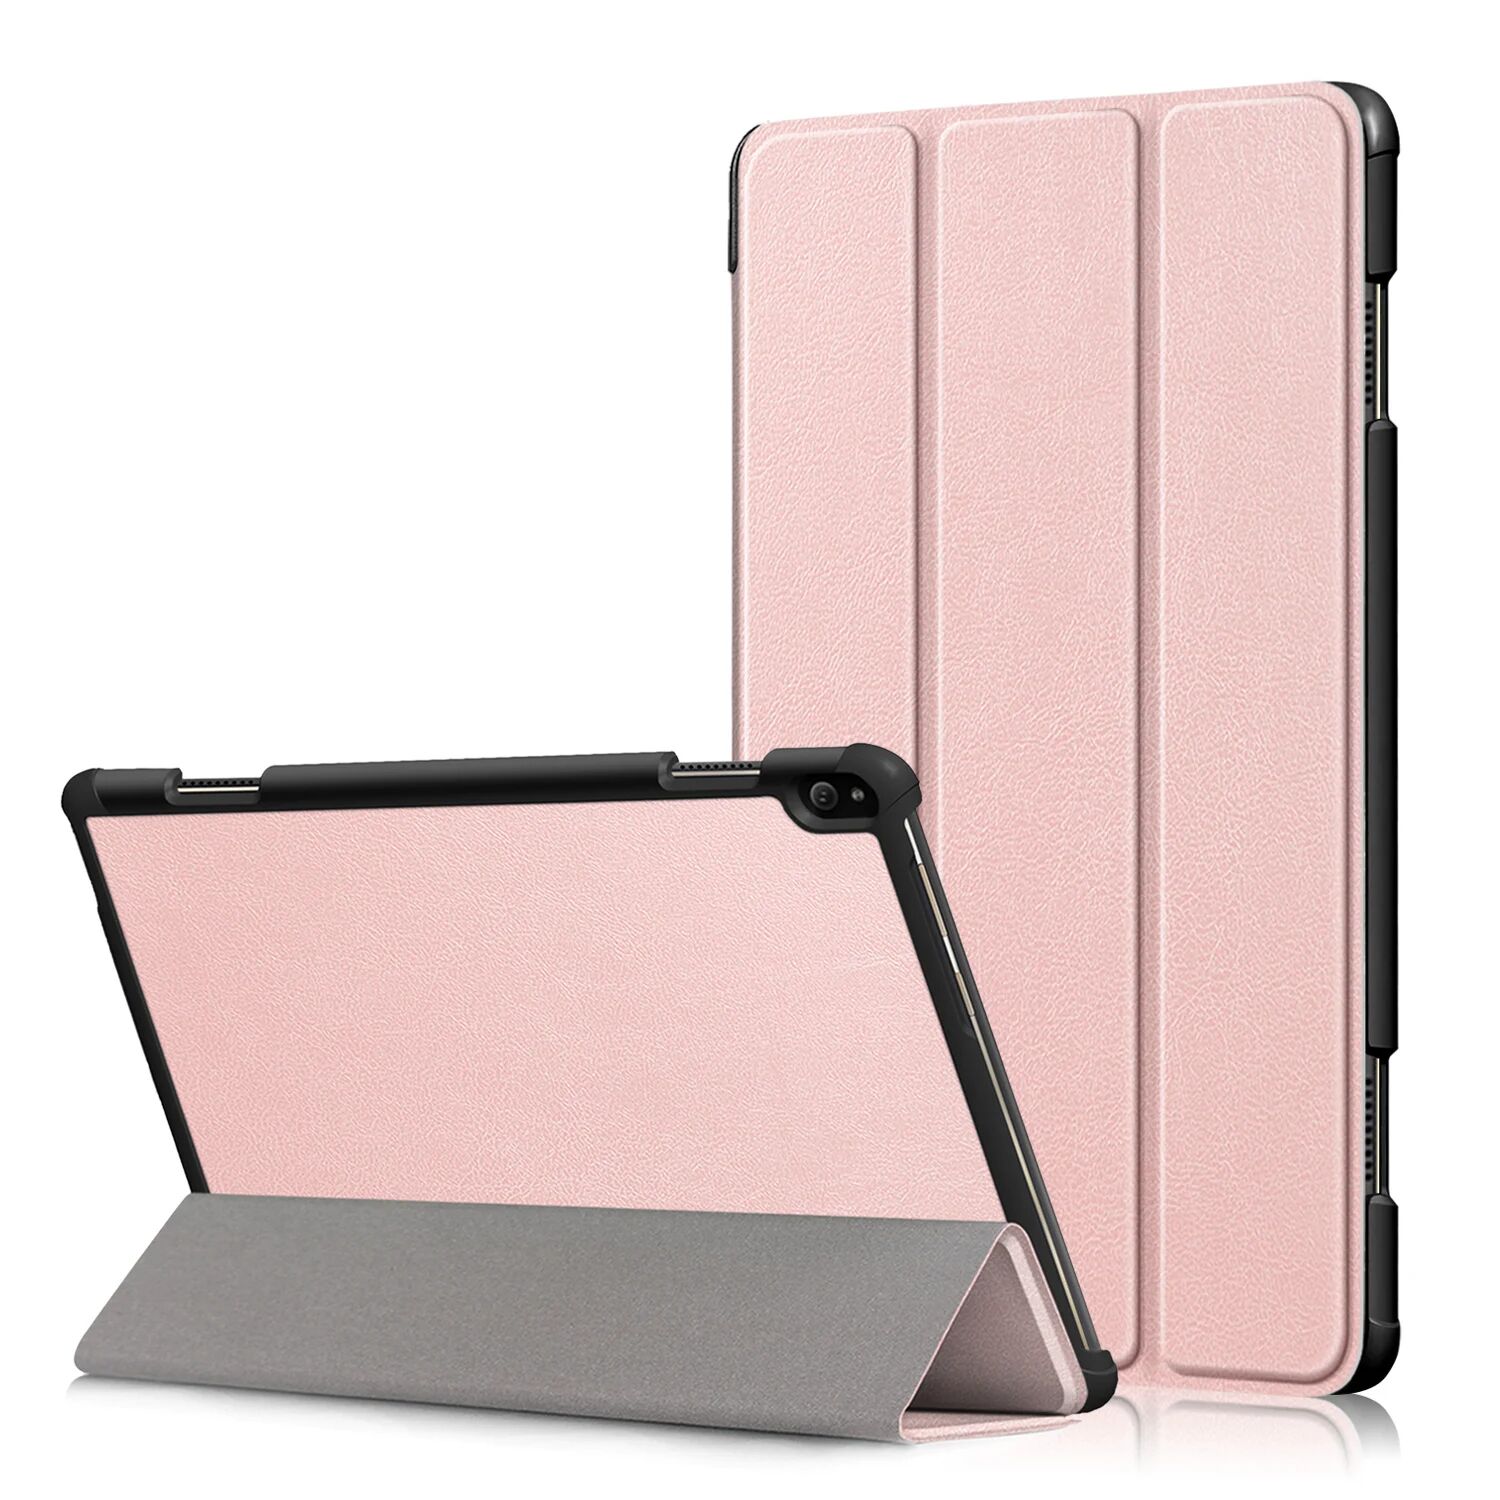 Lunso 3-Vouw sleepcover hoes Rose Goud voor de Lenovo Tab P10